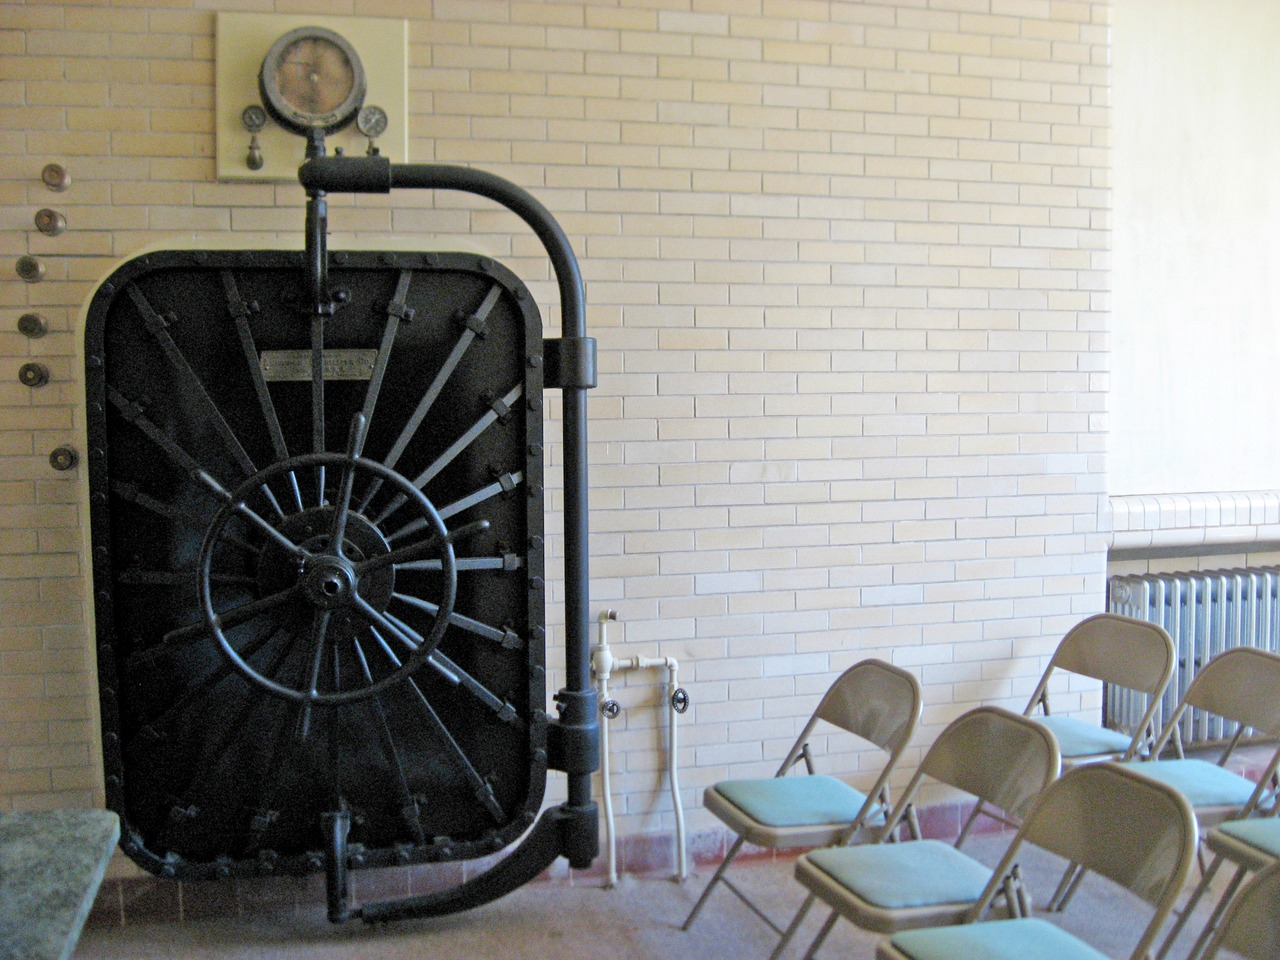 The vintage American Sterilizer Co. (AMSCO) of Erie, Pennsylvania safe-sized walk-in sterilizer in a room in the Stable Complex (1928) at Pebble Hill Plantation.